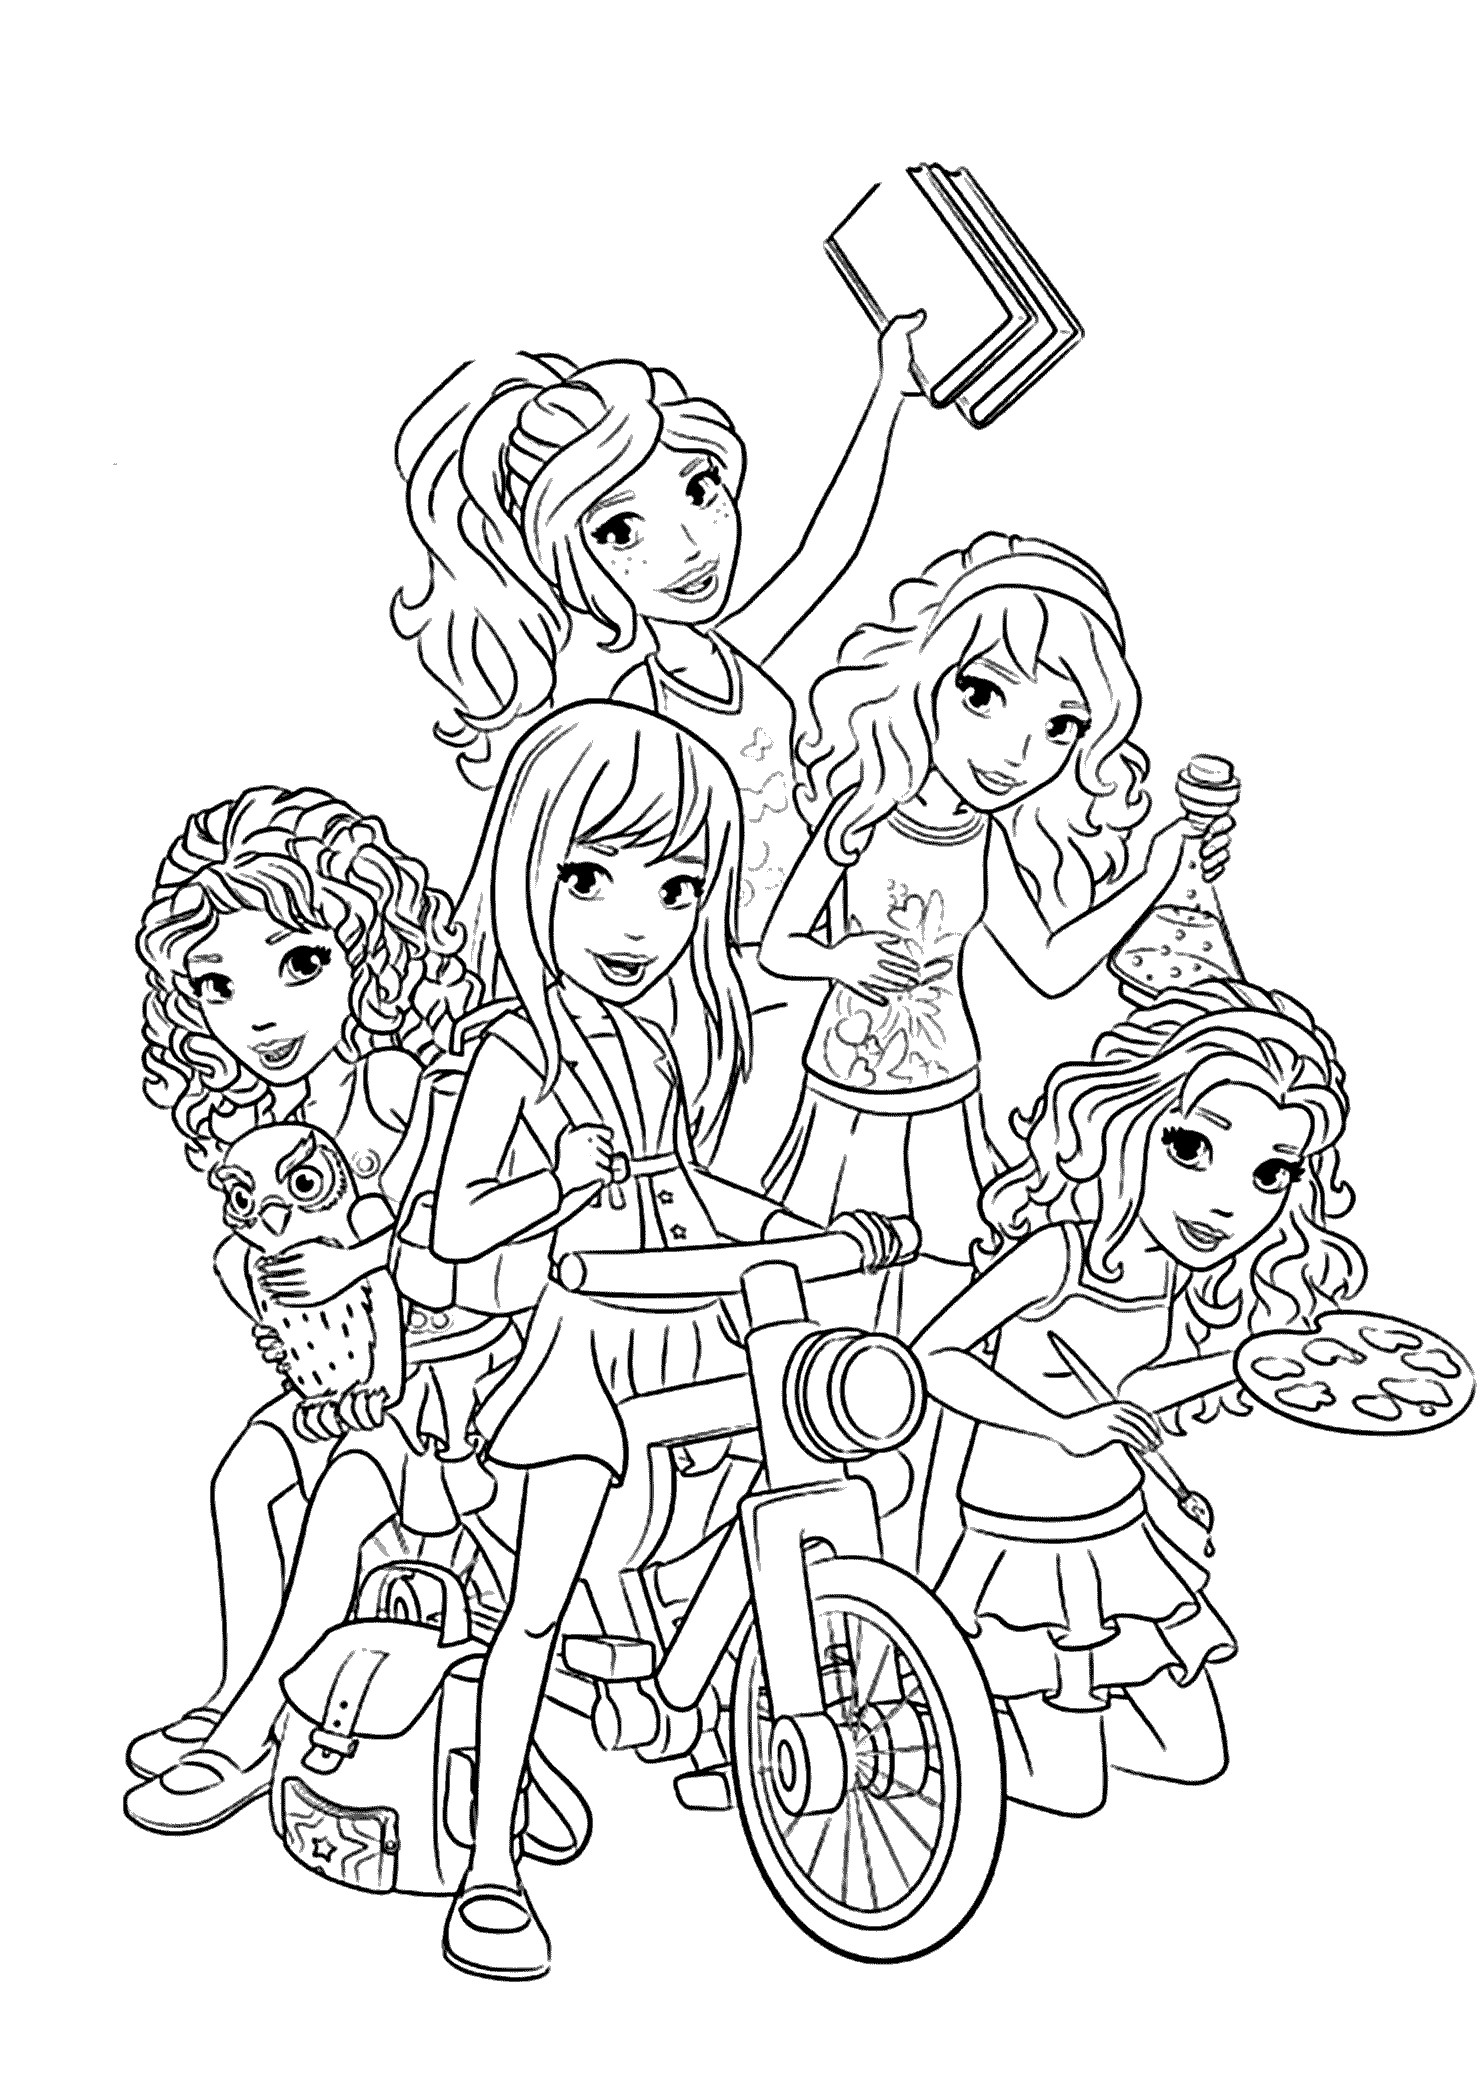 Girl Lego Coloring Pages
 friends coloring pages for girls